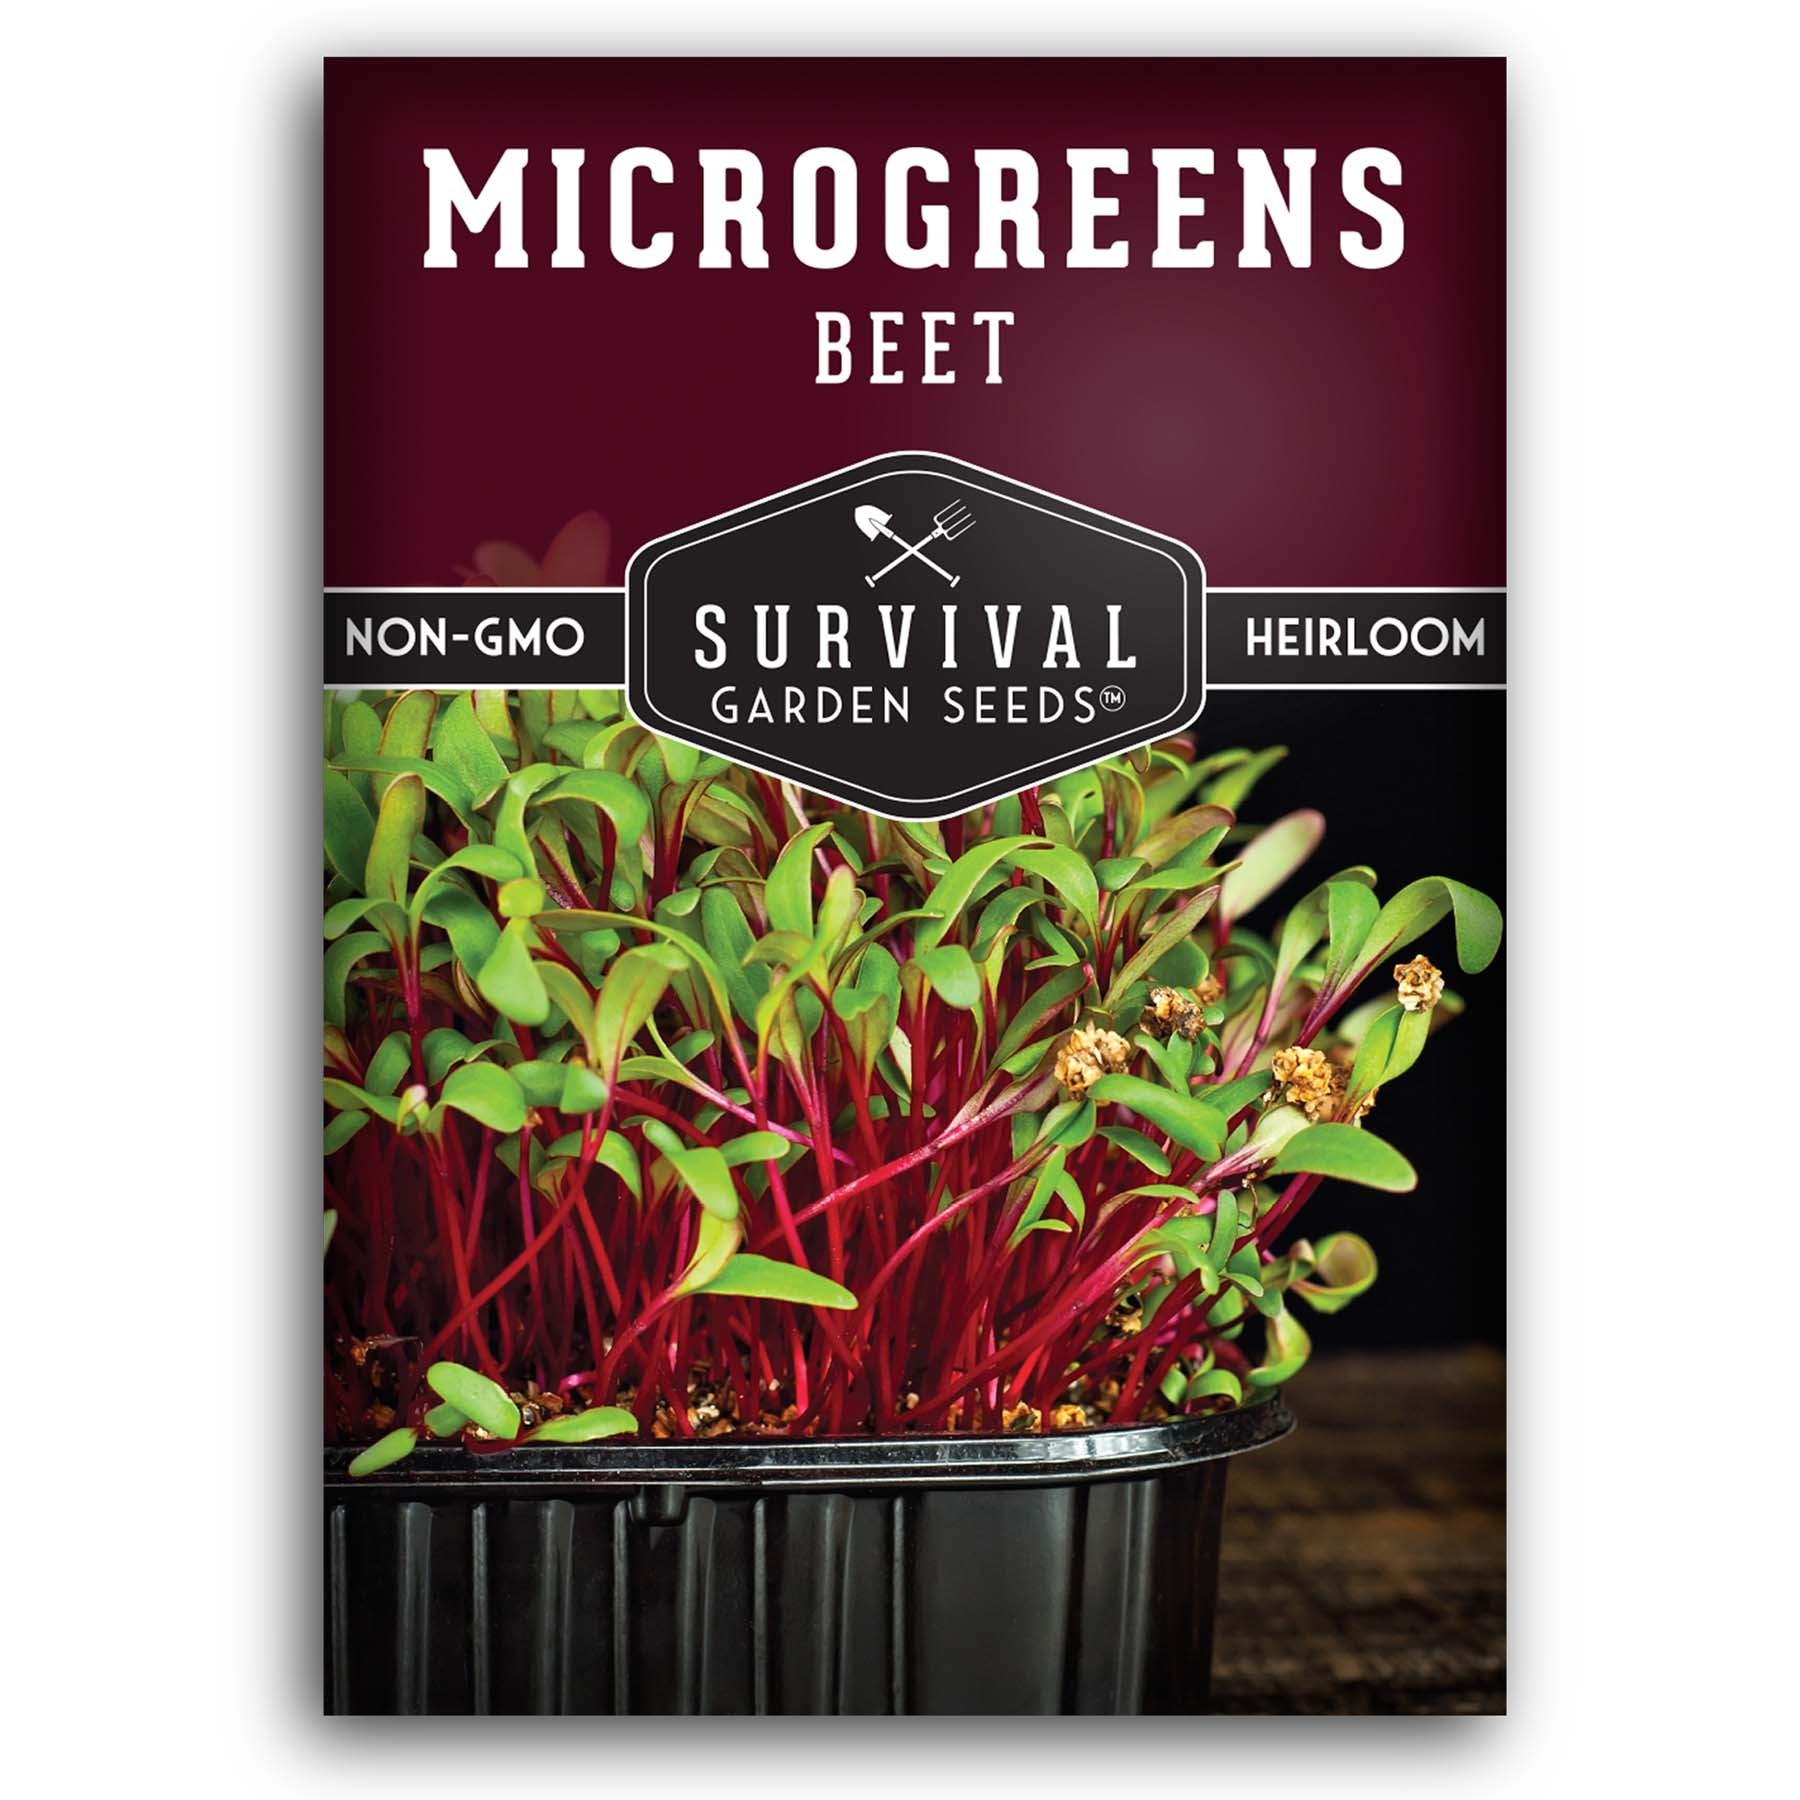 Beet Microgreens seeds for sprouting